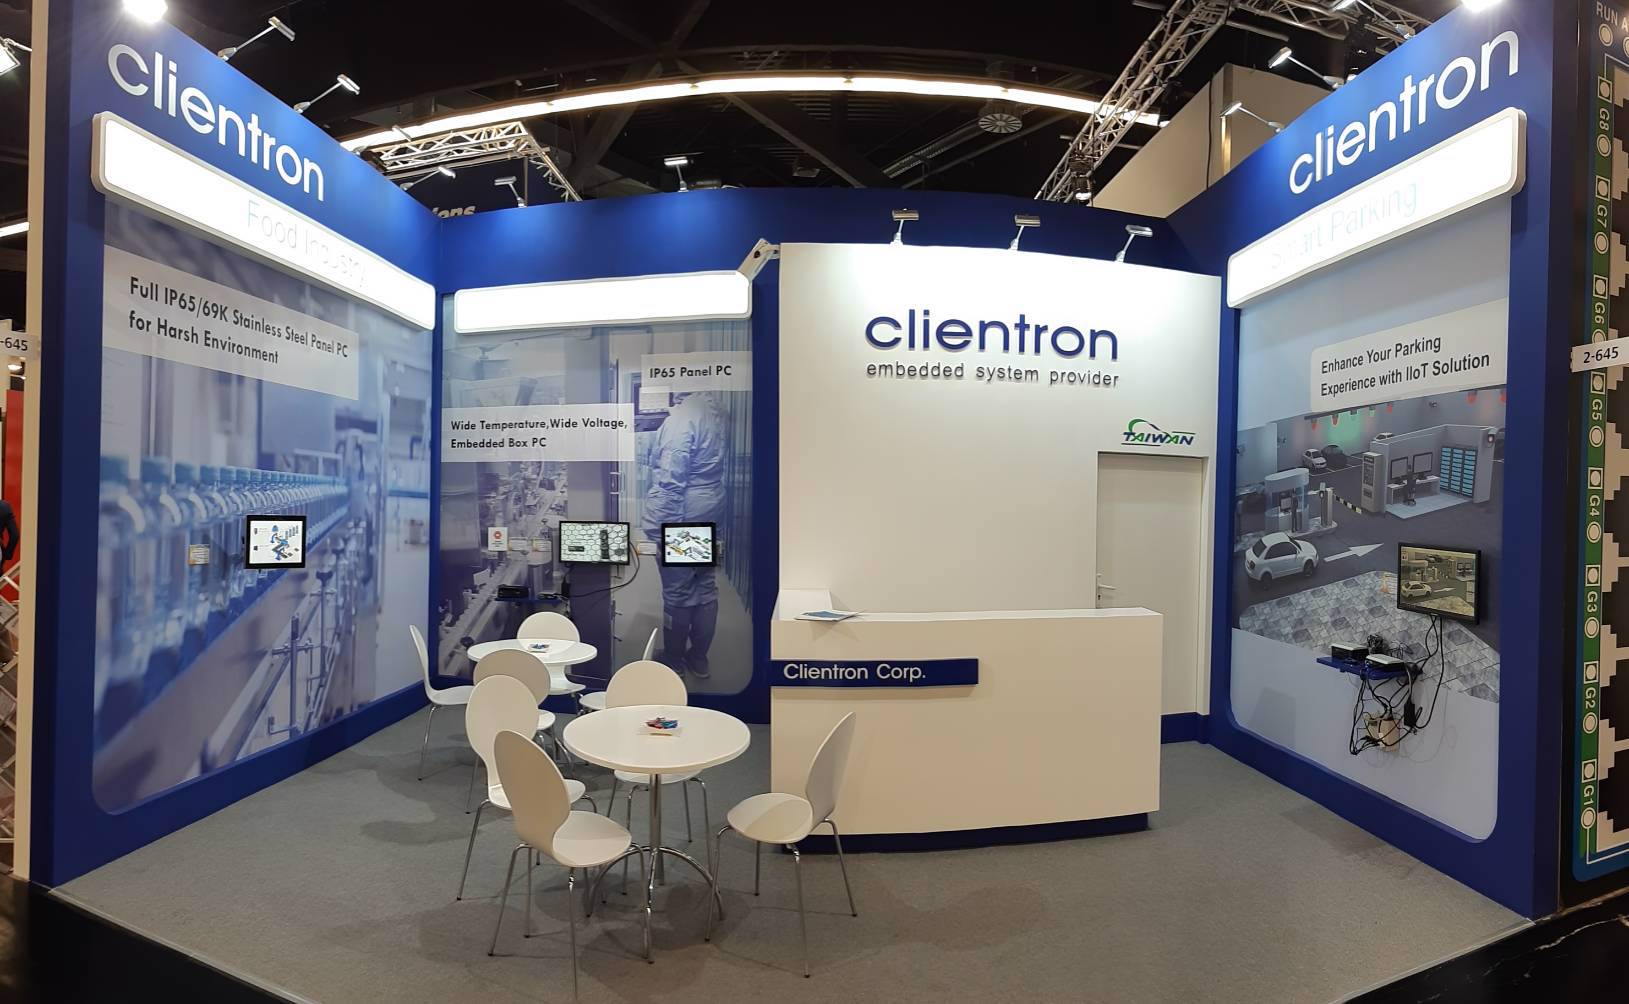 Clientron at Embedded World 2019